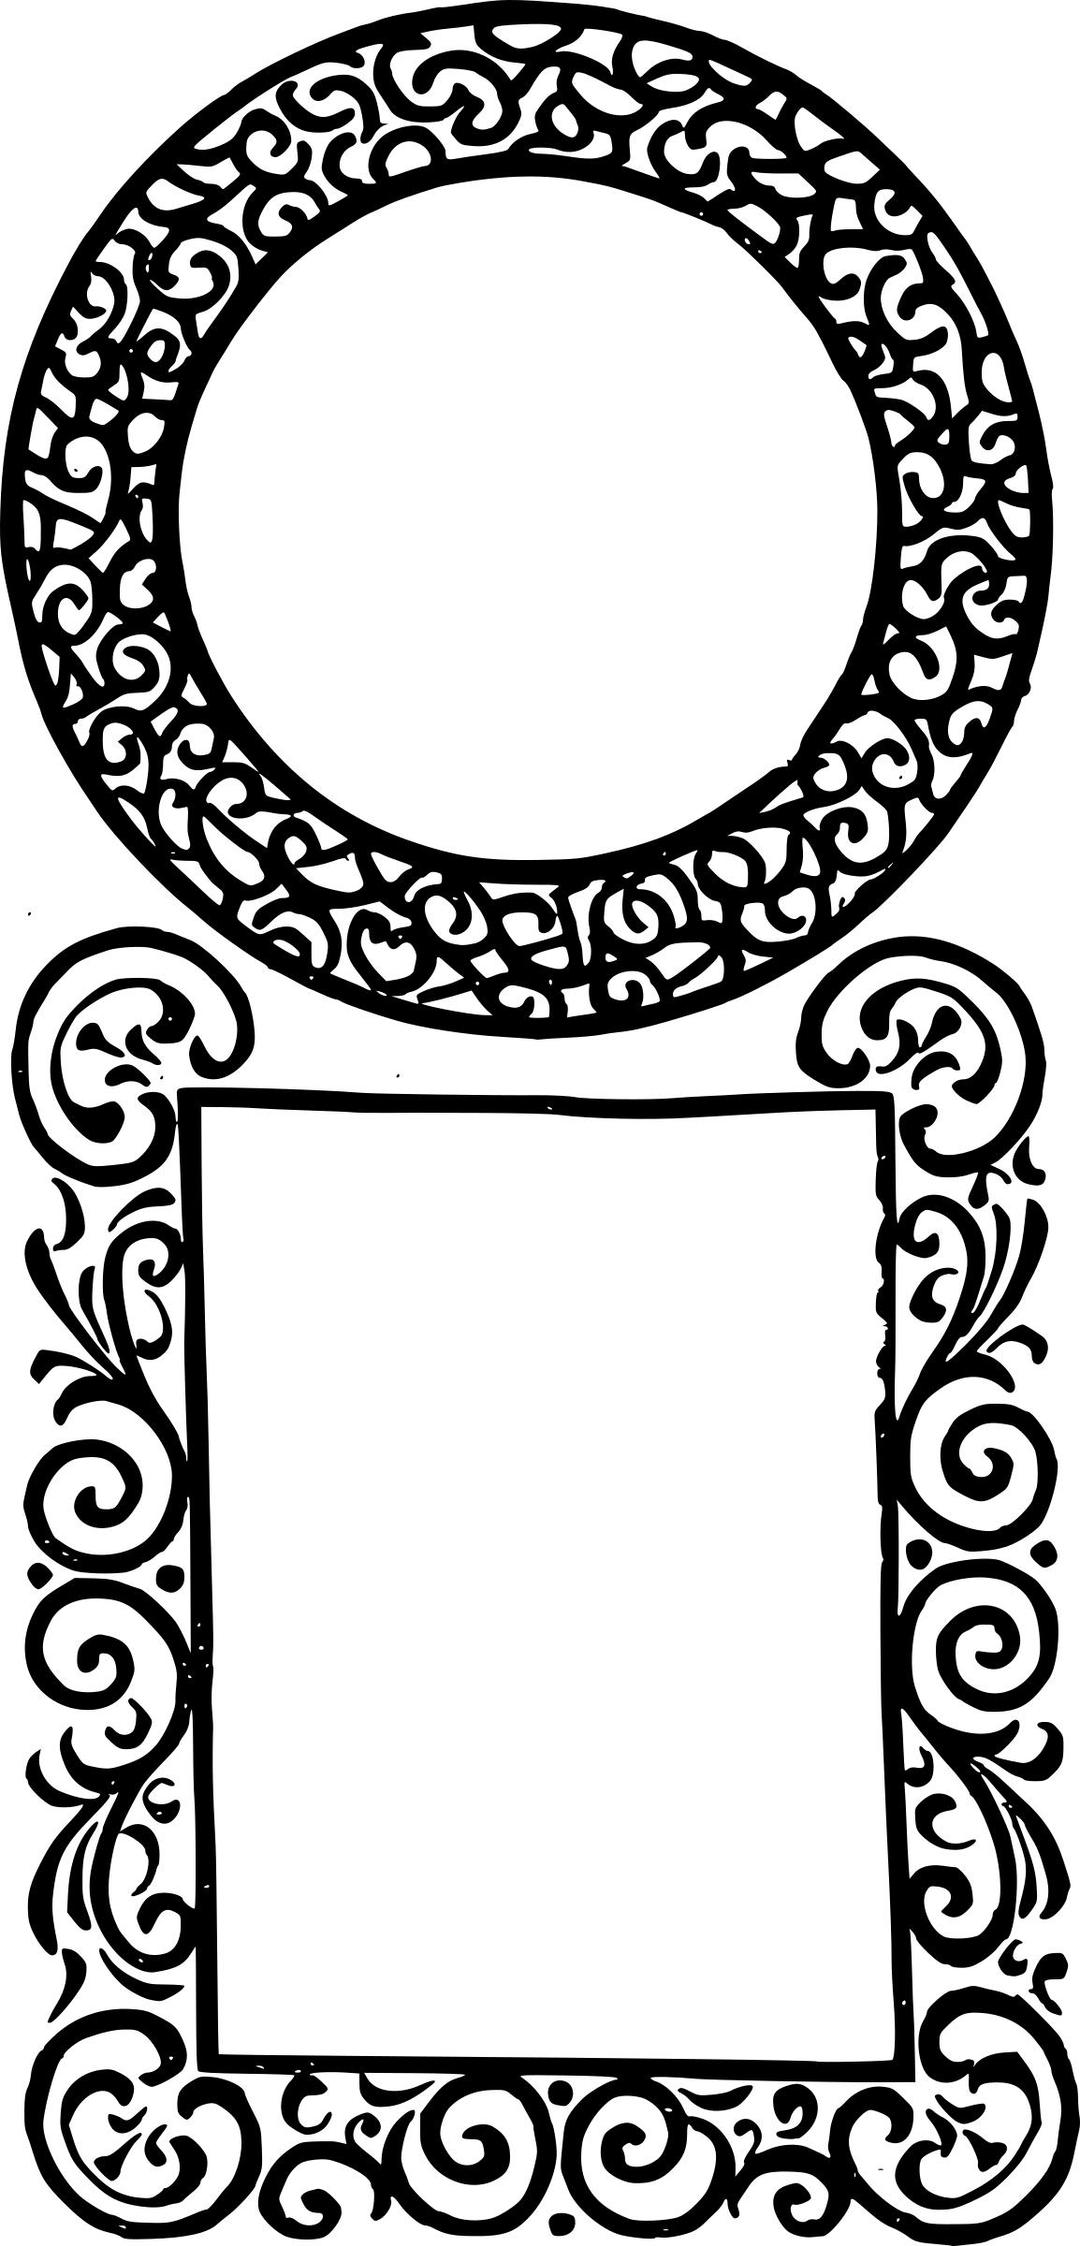 Circle - Square - double frame png transparent